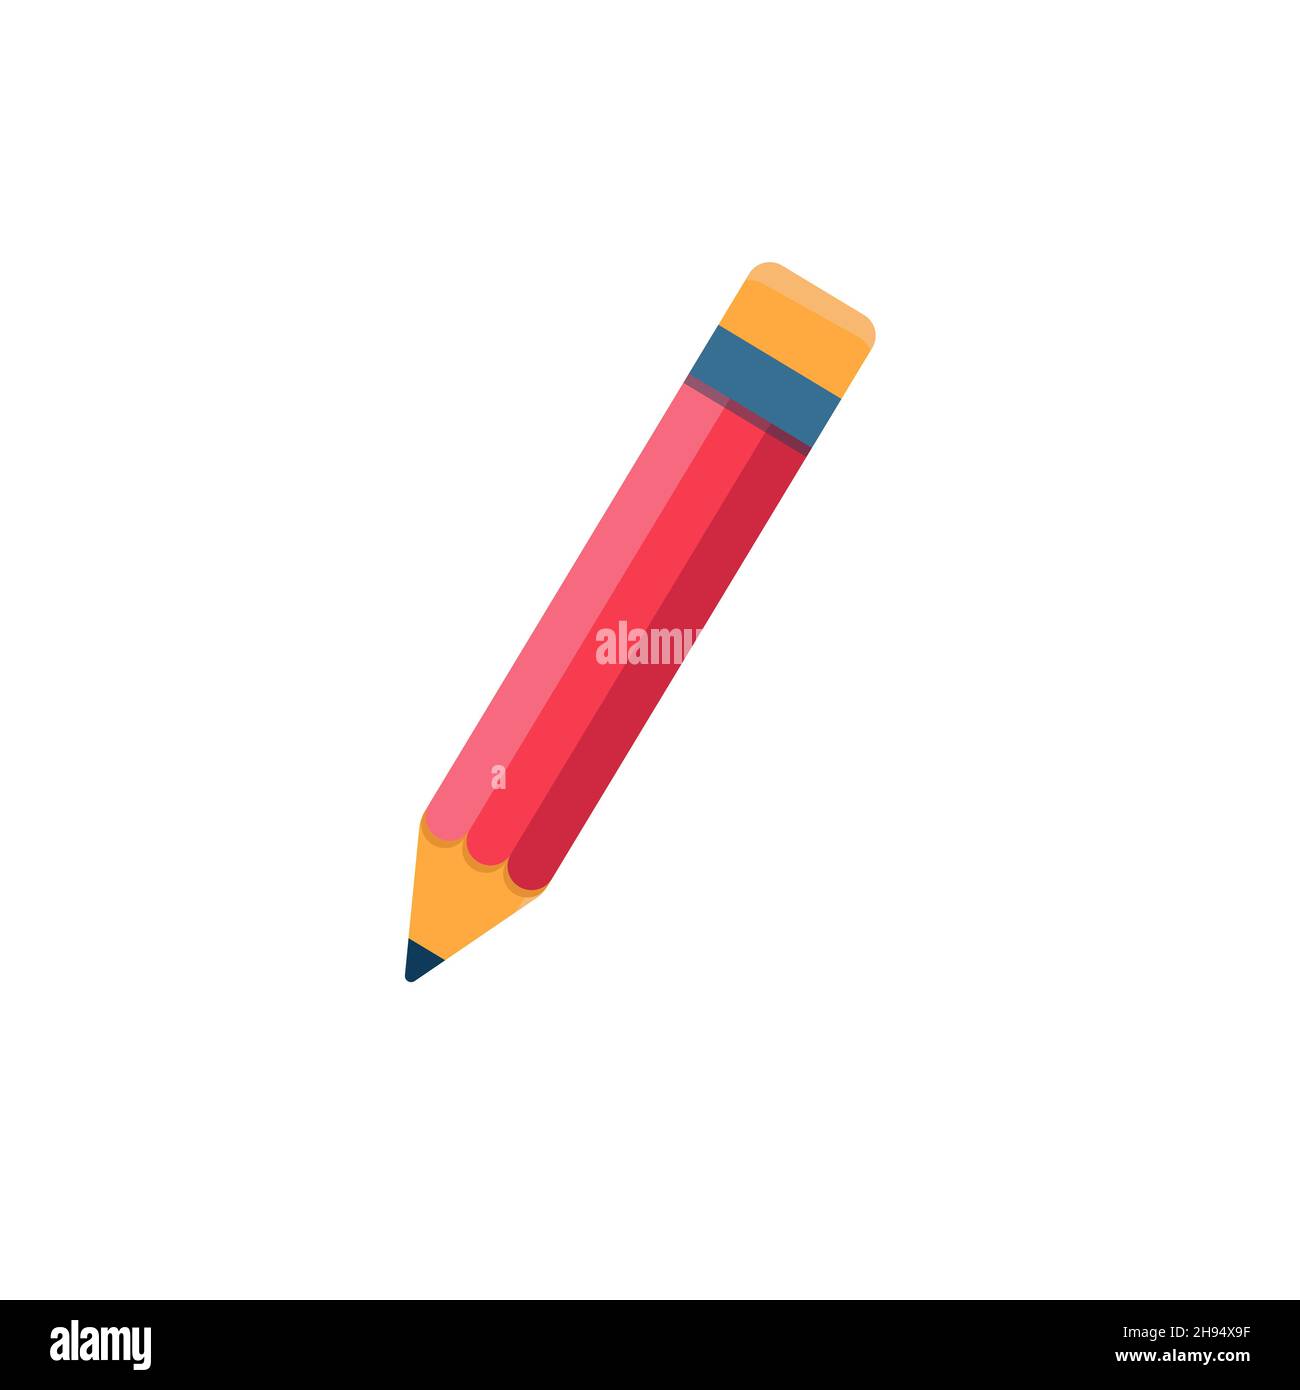 Isolated pencil in different styles of drawing photorealism, sketch, flat and icon , Stock Vector